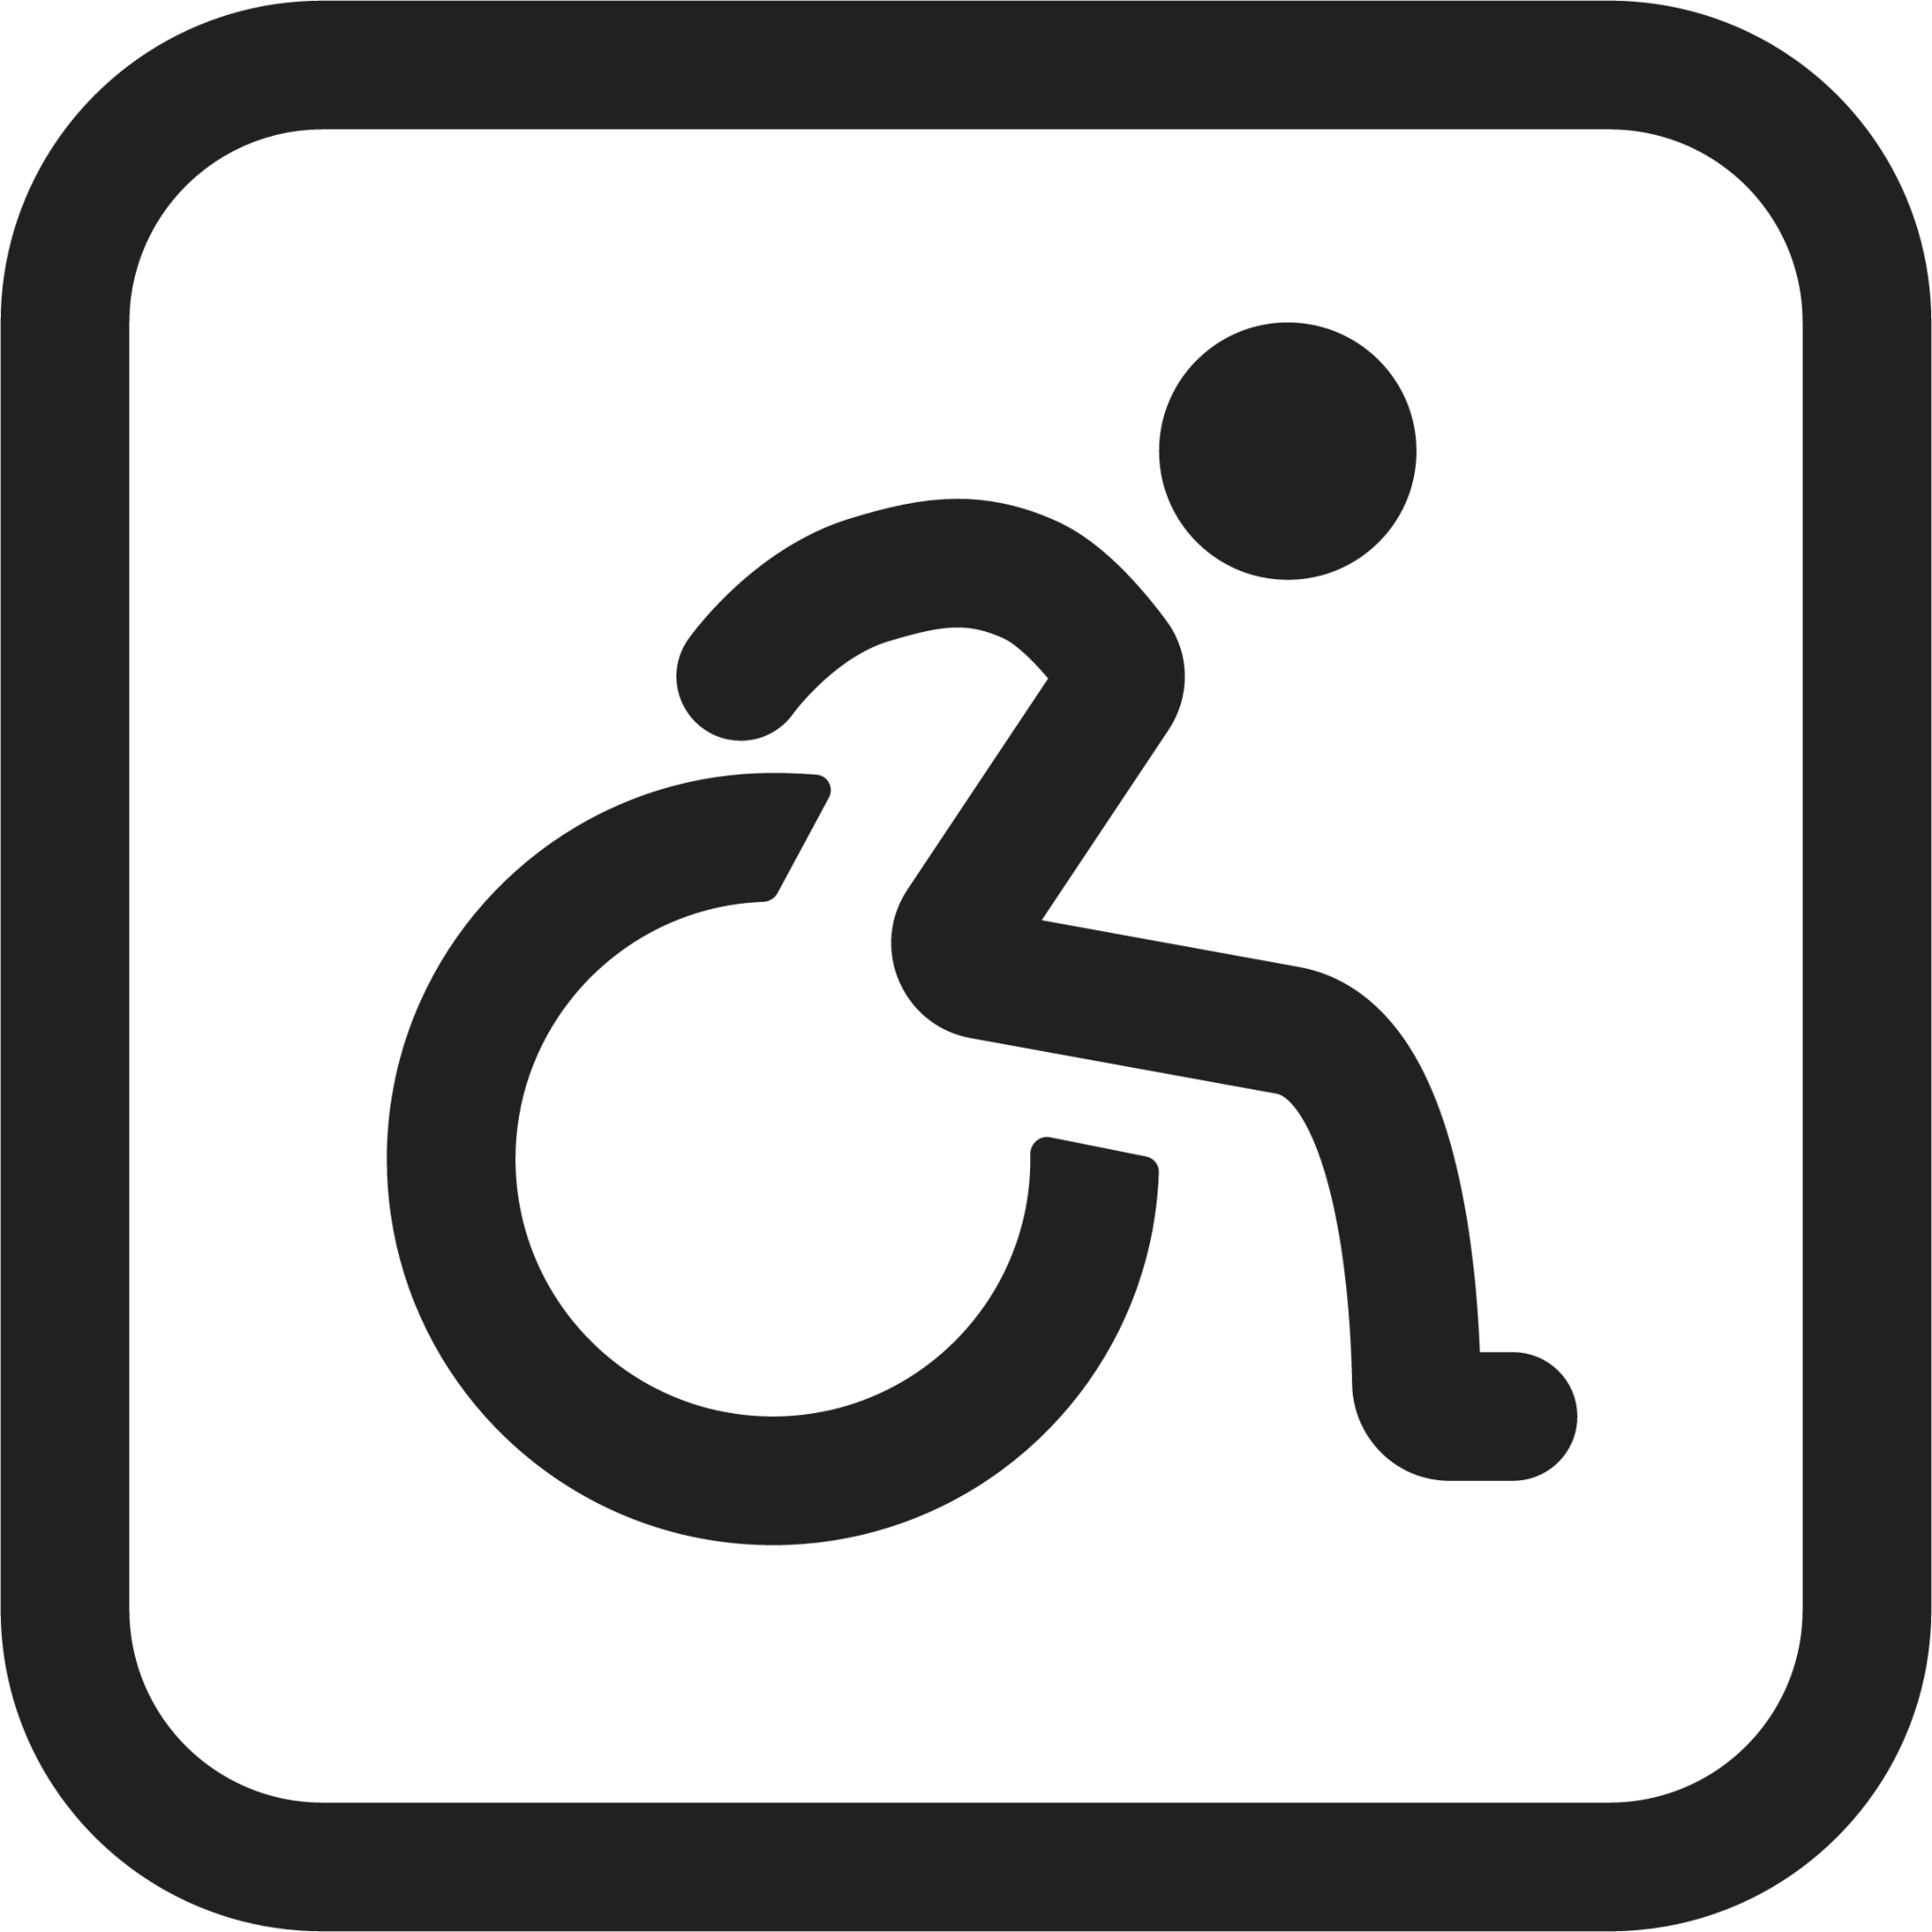 wheelchair icon png